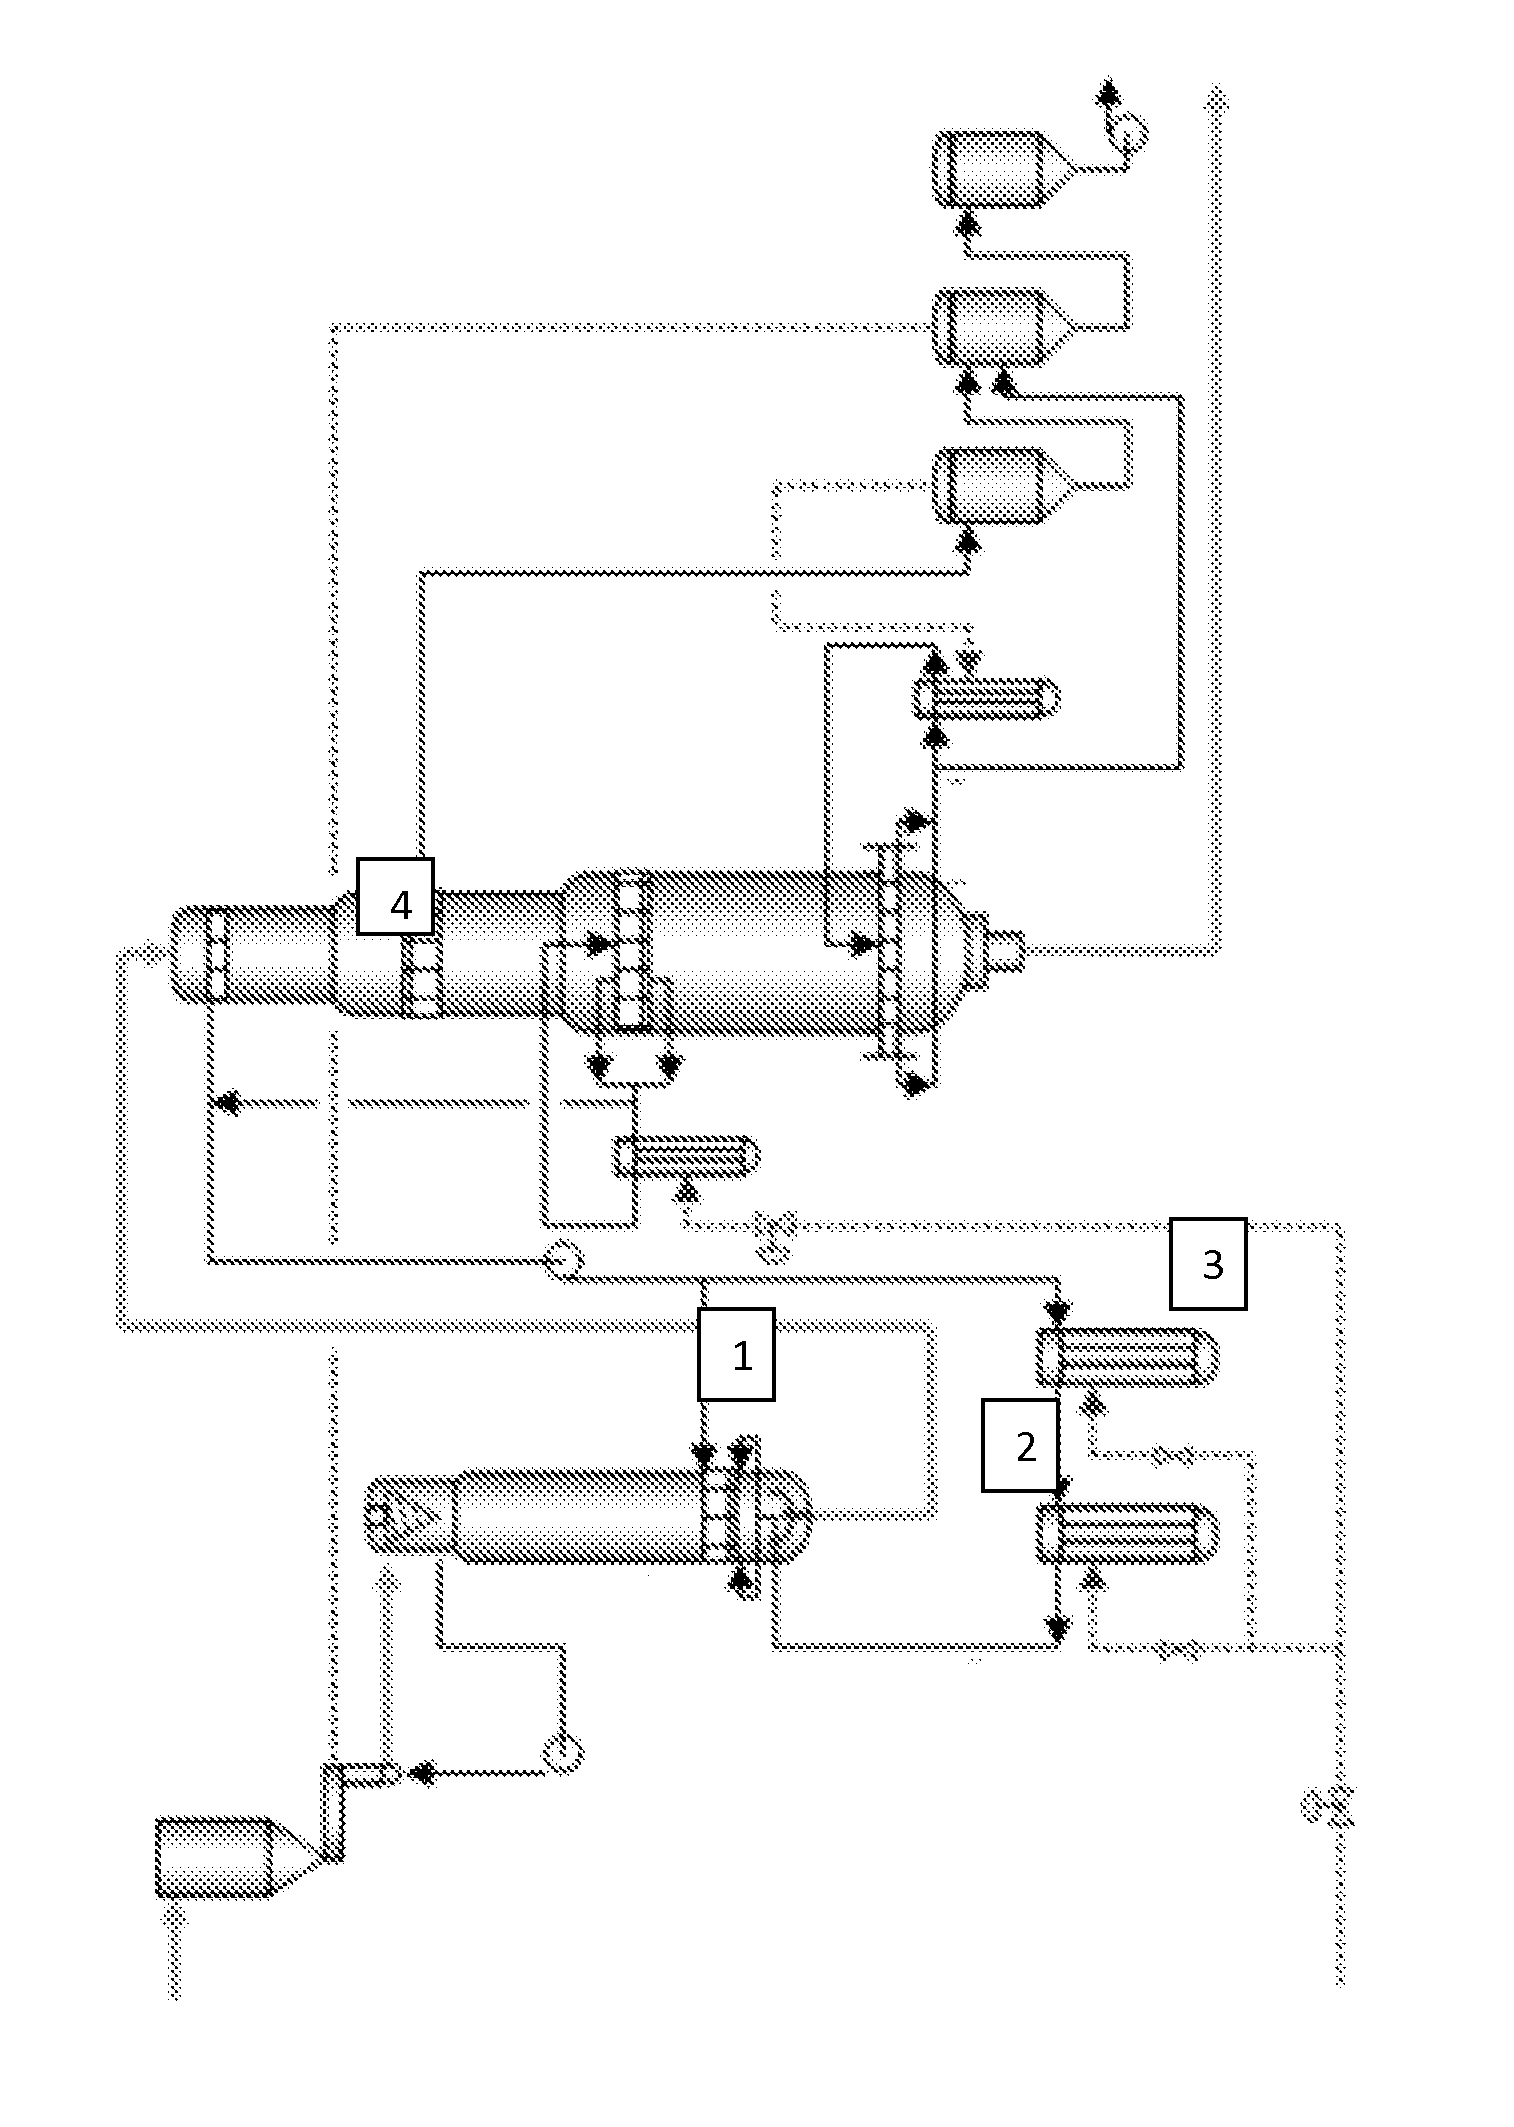 Method of processing chemical pulp